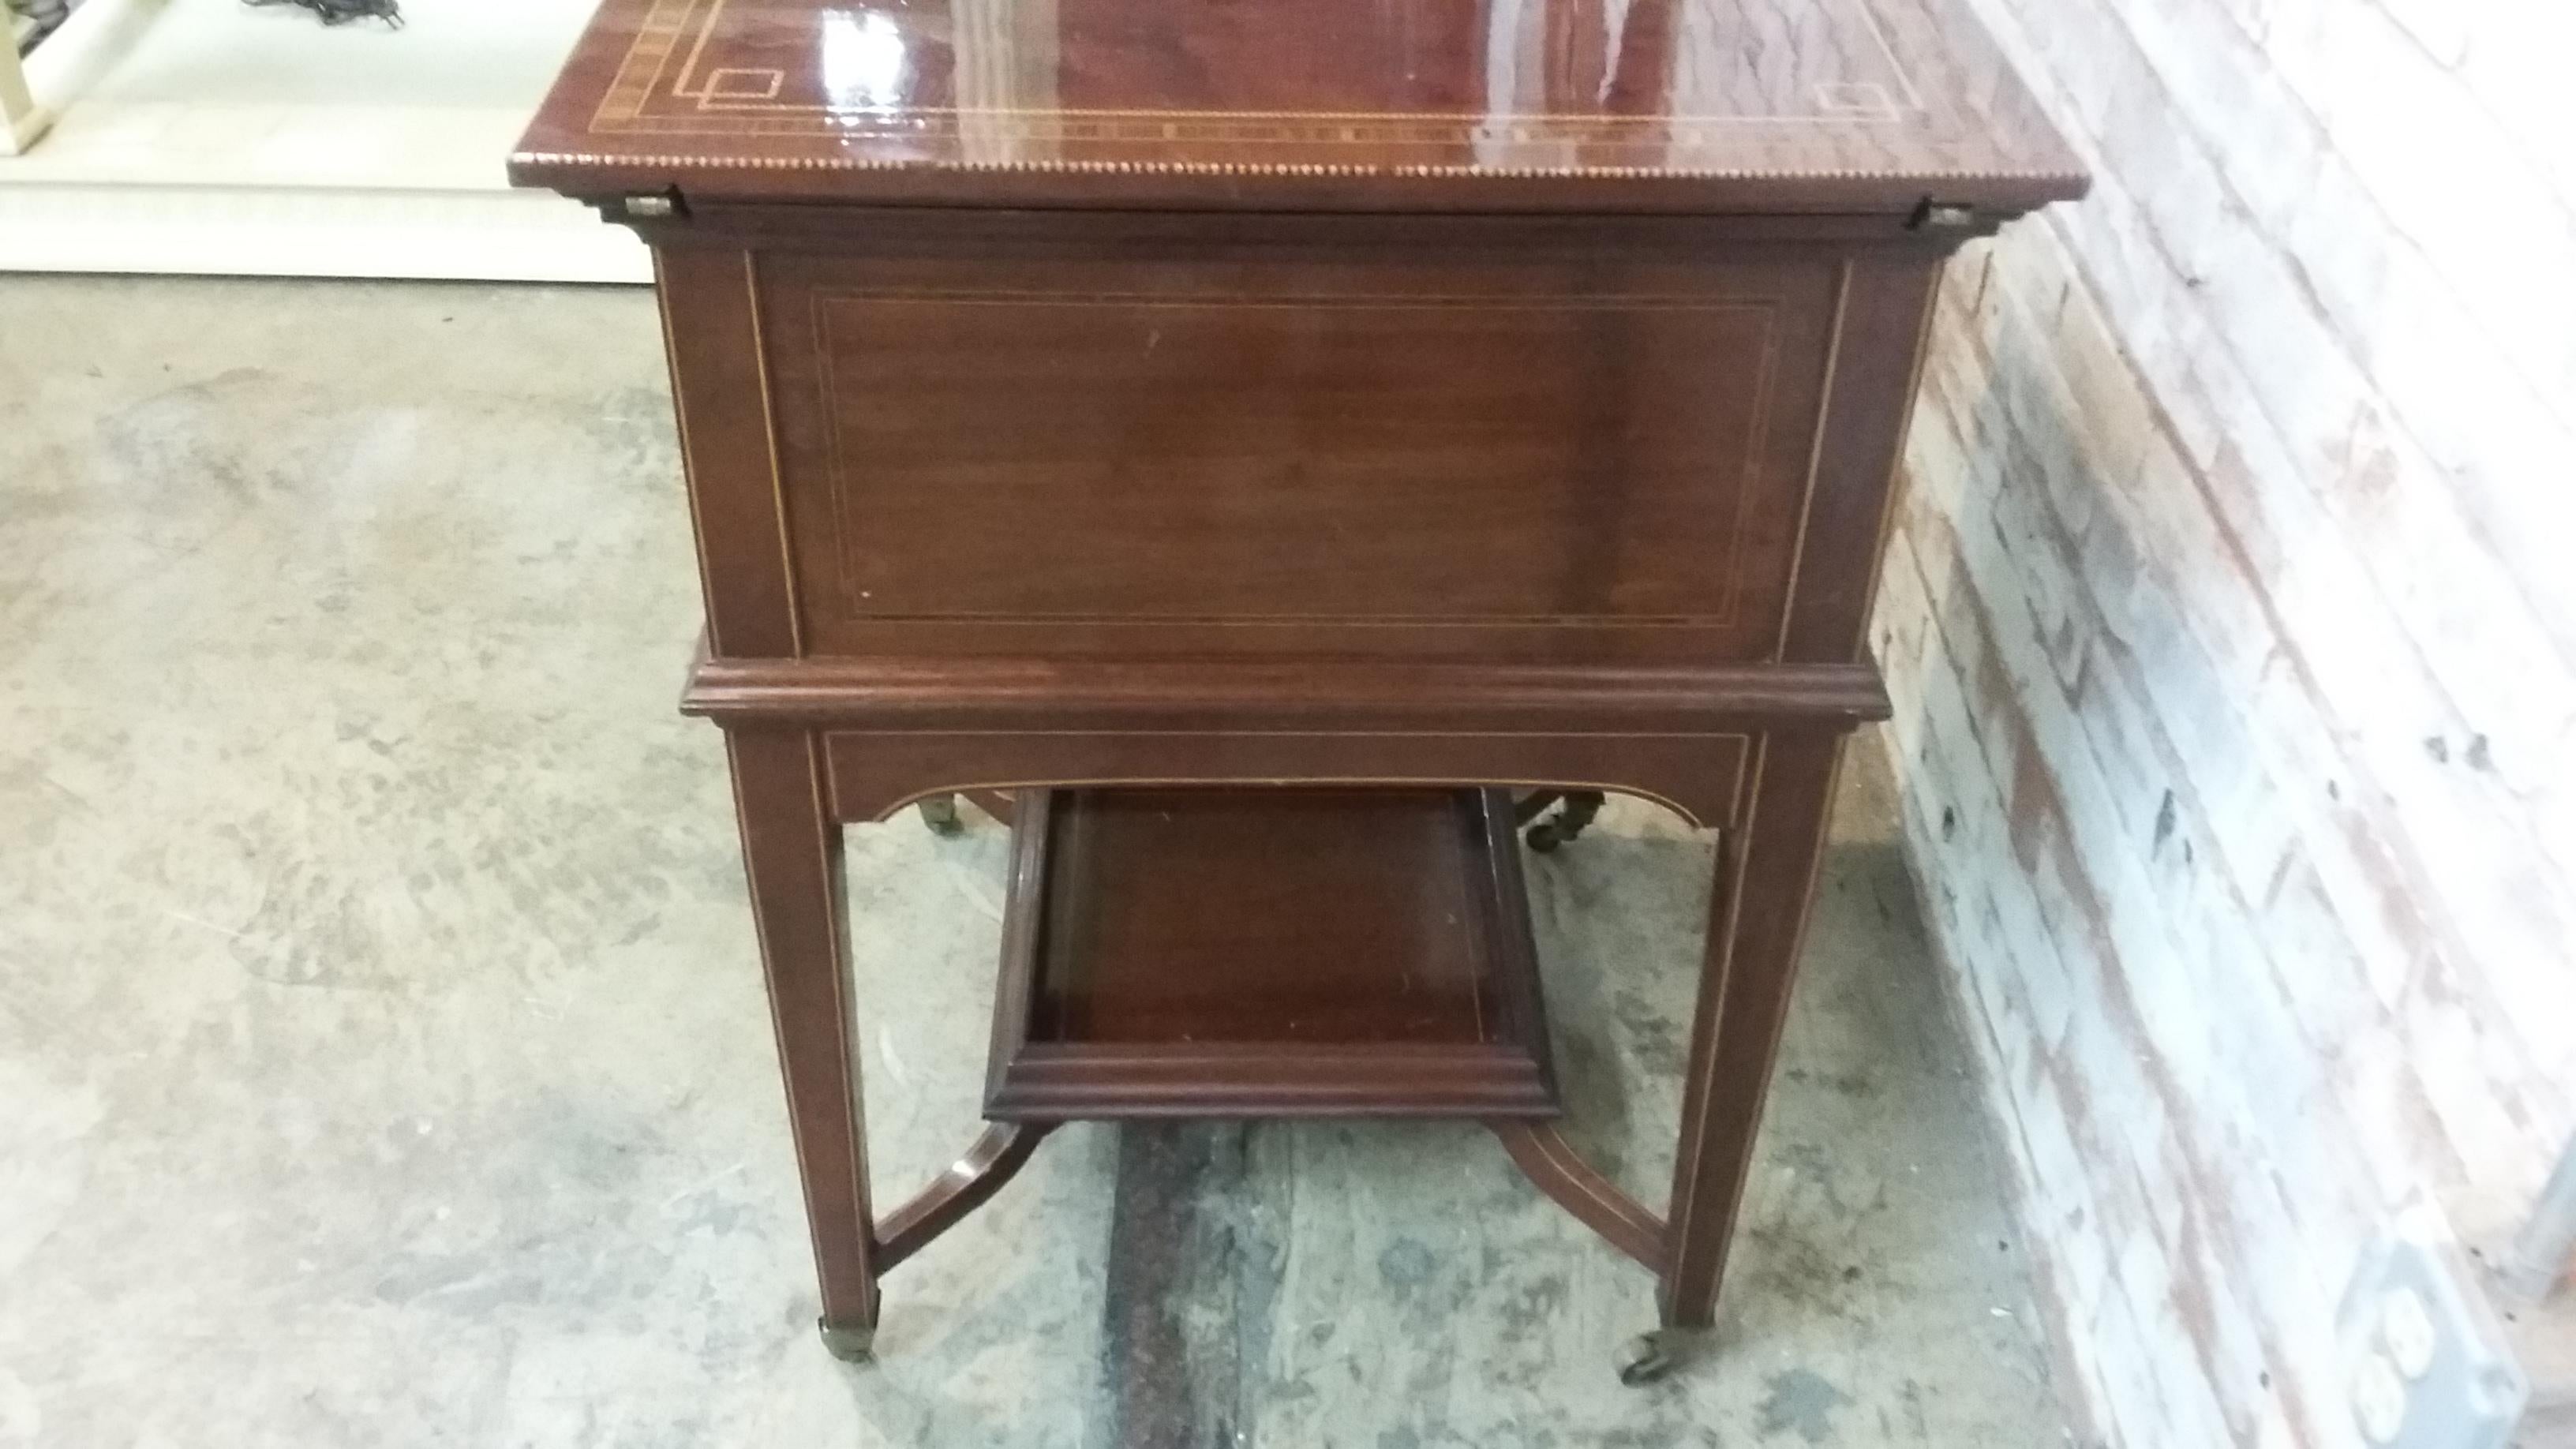 Vintage mahogany bar cart. Signed J. Bagshaw & Sons. Church Street Liverpool. Pats # 1631. # 5466. Opens to display 3 cut glass liquor decanters. Marked Scotch, Vodka, & Brandy. There is a removable serving tray as well as a storage area for cigars,